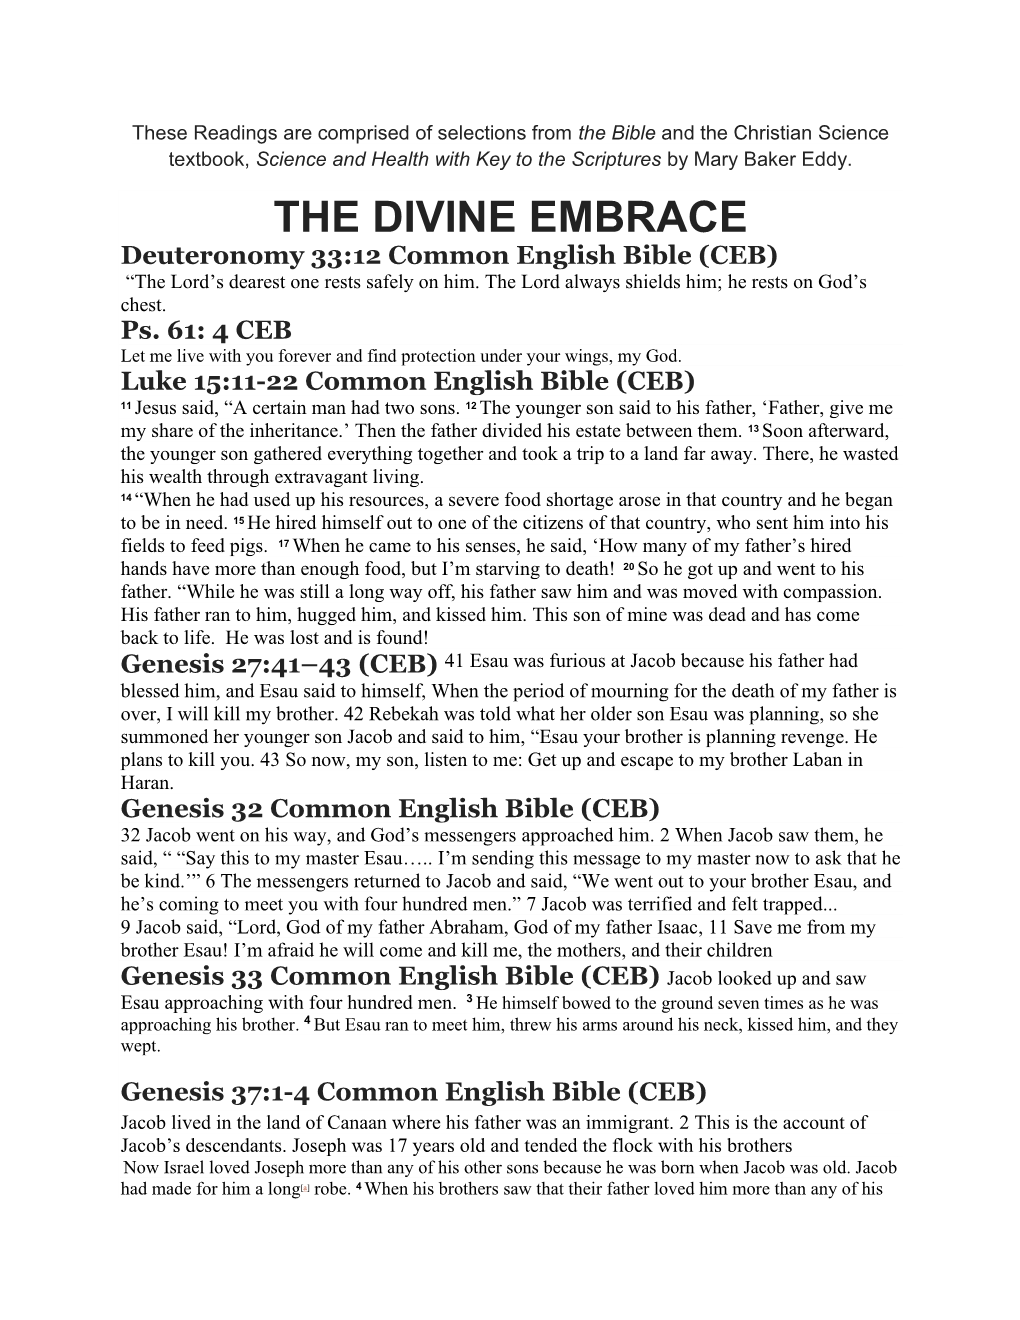 THE DIVINE EMBRACE Deuteronomy 33:12 Common English Bible (CEB) “The Lord’S Dearest One Rests Safely on Him